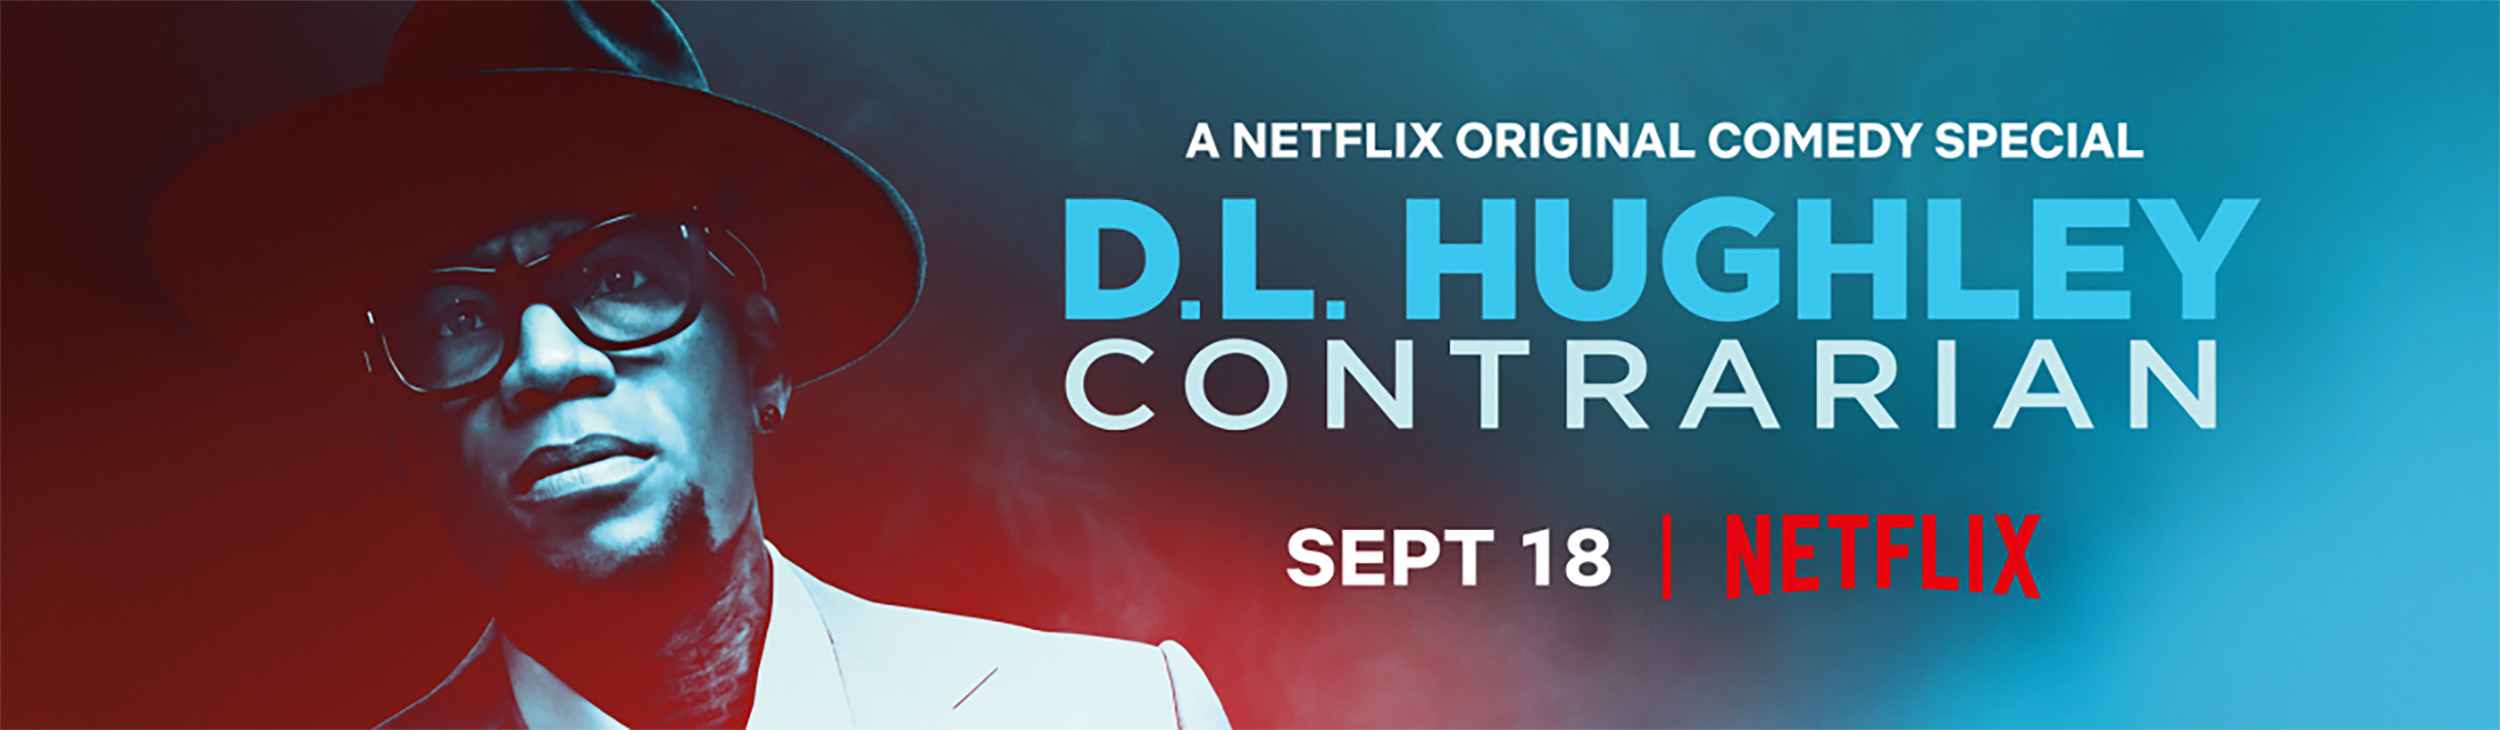 Mega Sized TV Poster Image for D.L. Hughley: Contrarian 